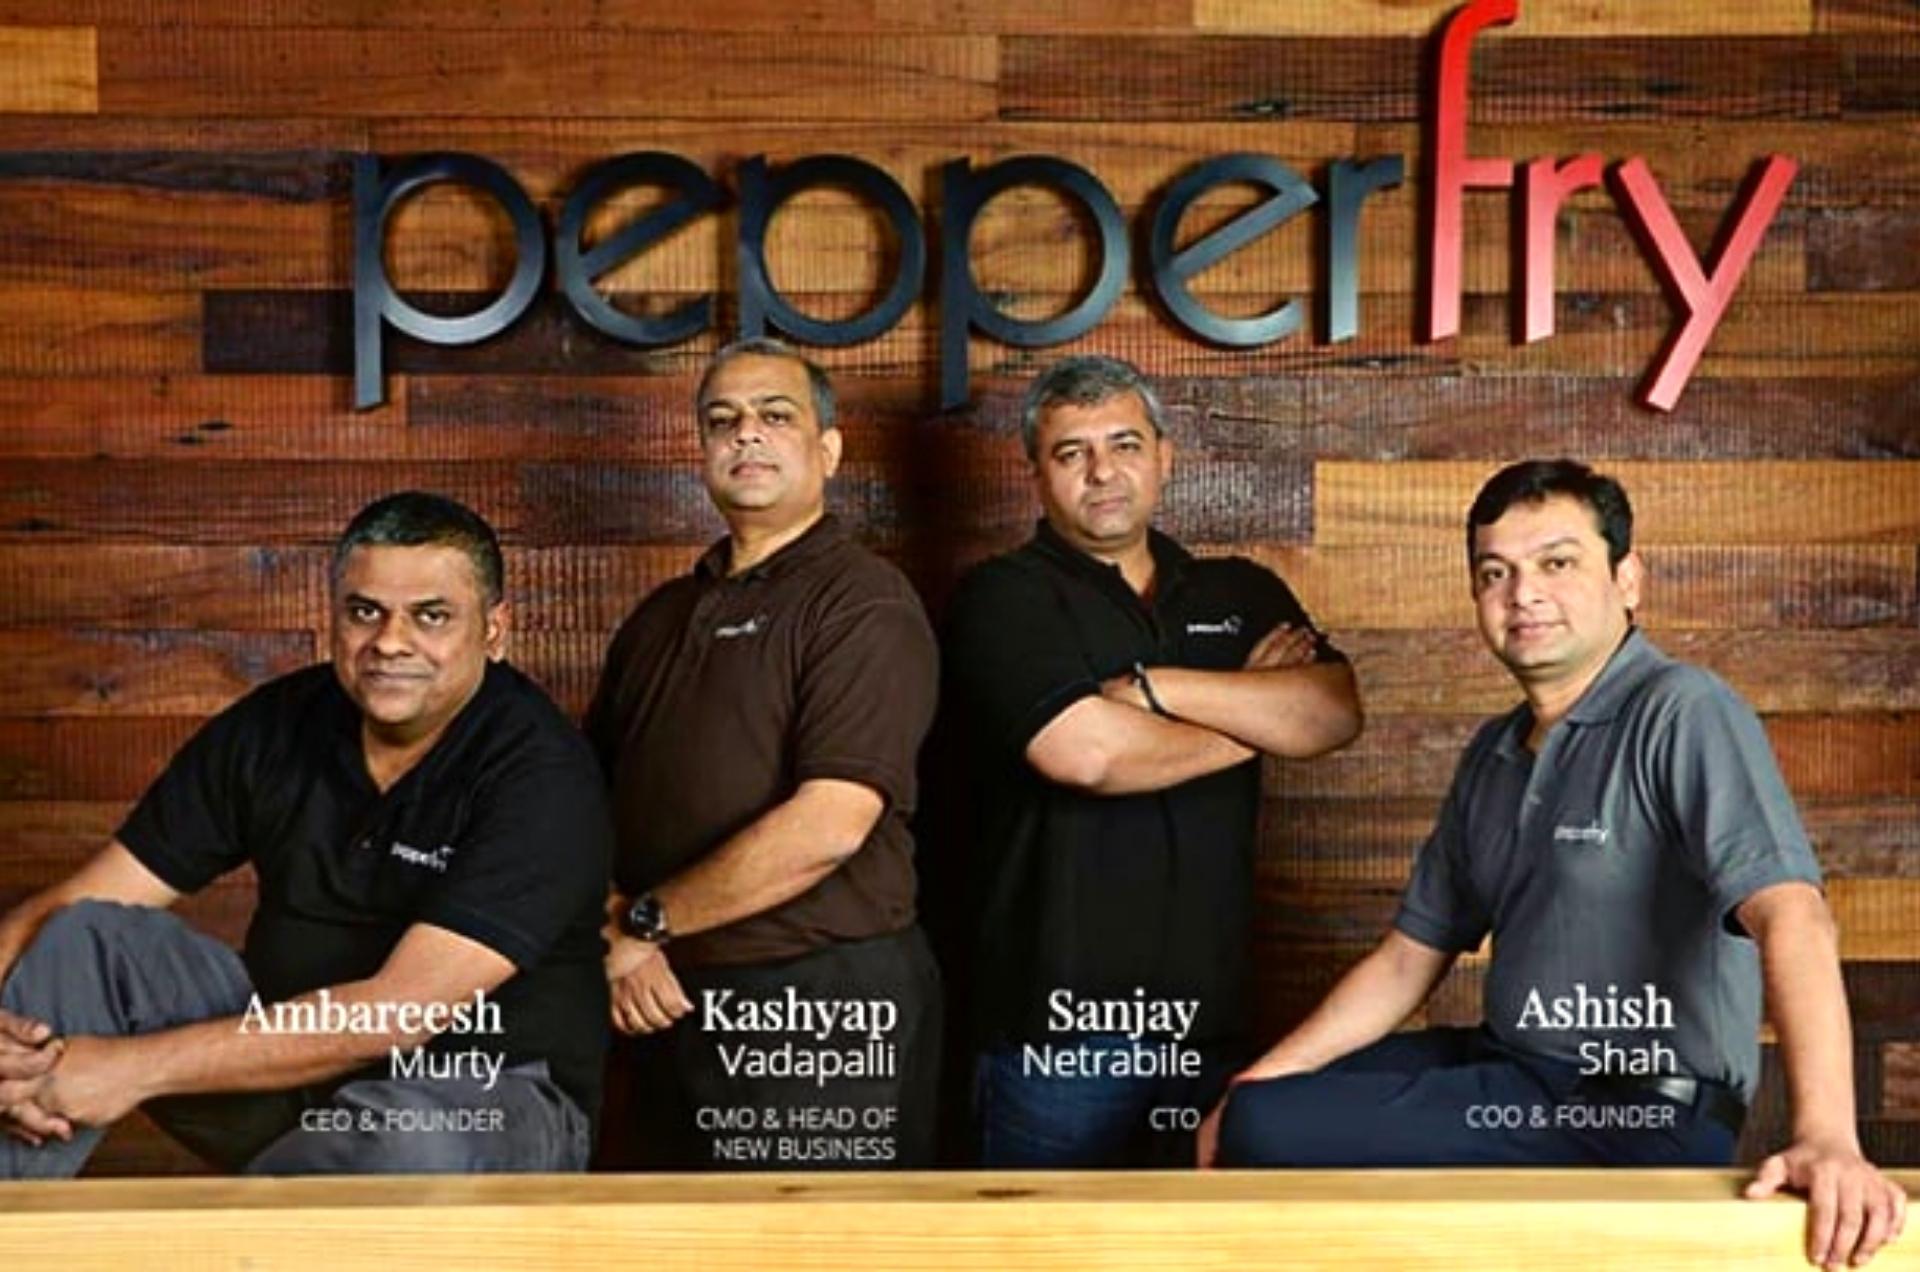 Pepperfry is India's largest online furniture store, with more than 200,000 products, including furniture, home accessories, & kitchen goods.